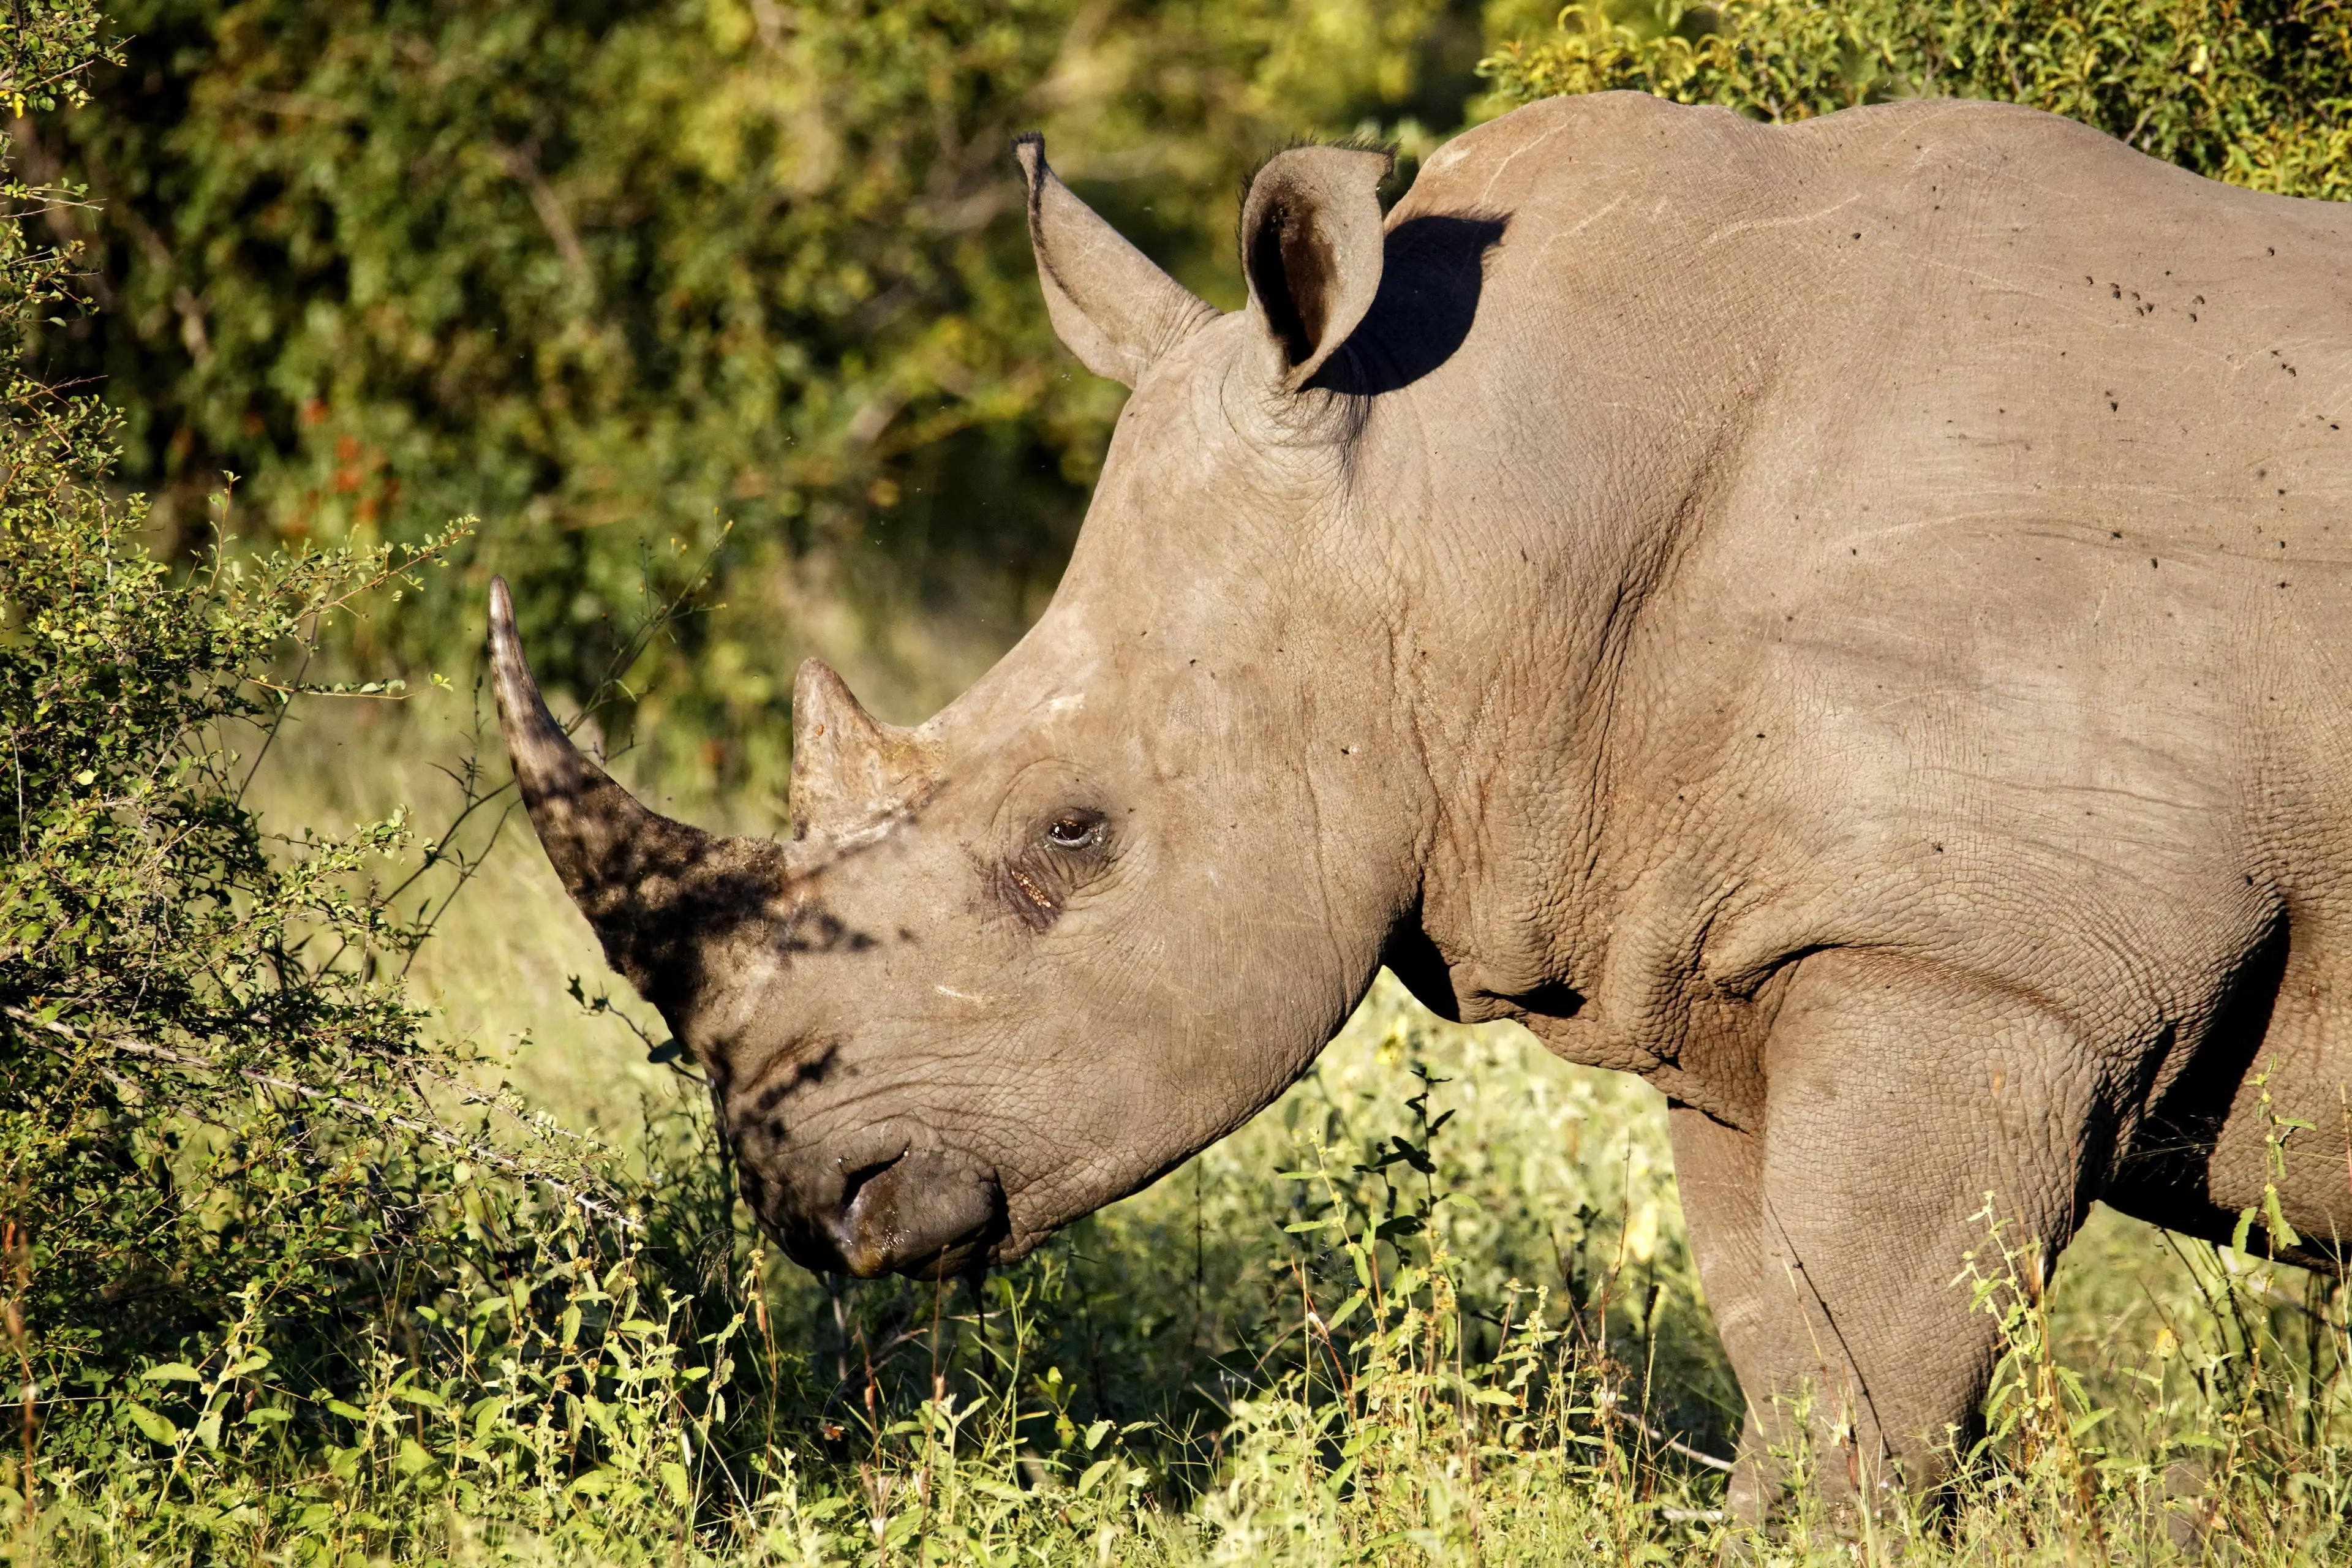 A rhino in Kruger National Park.